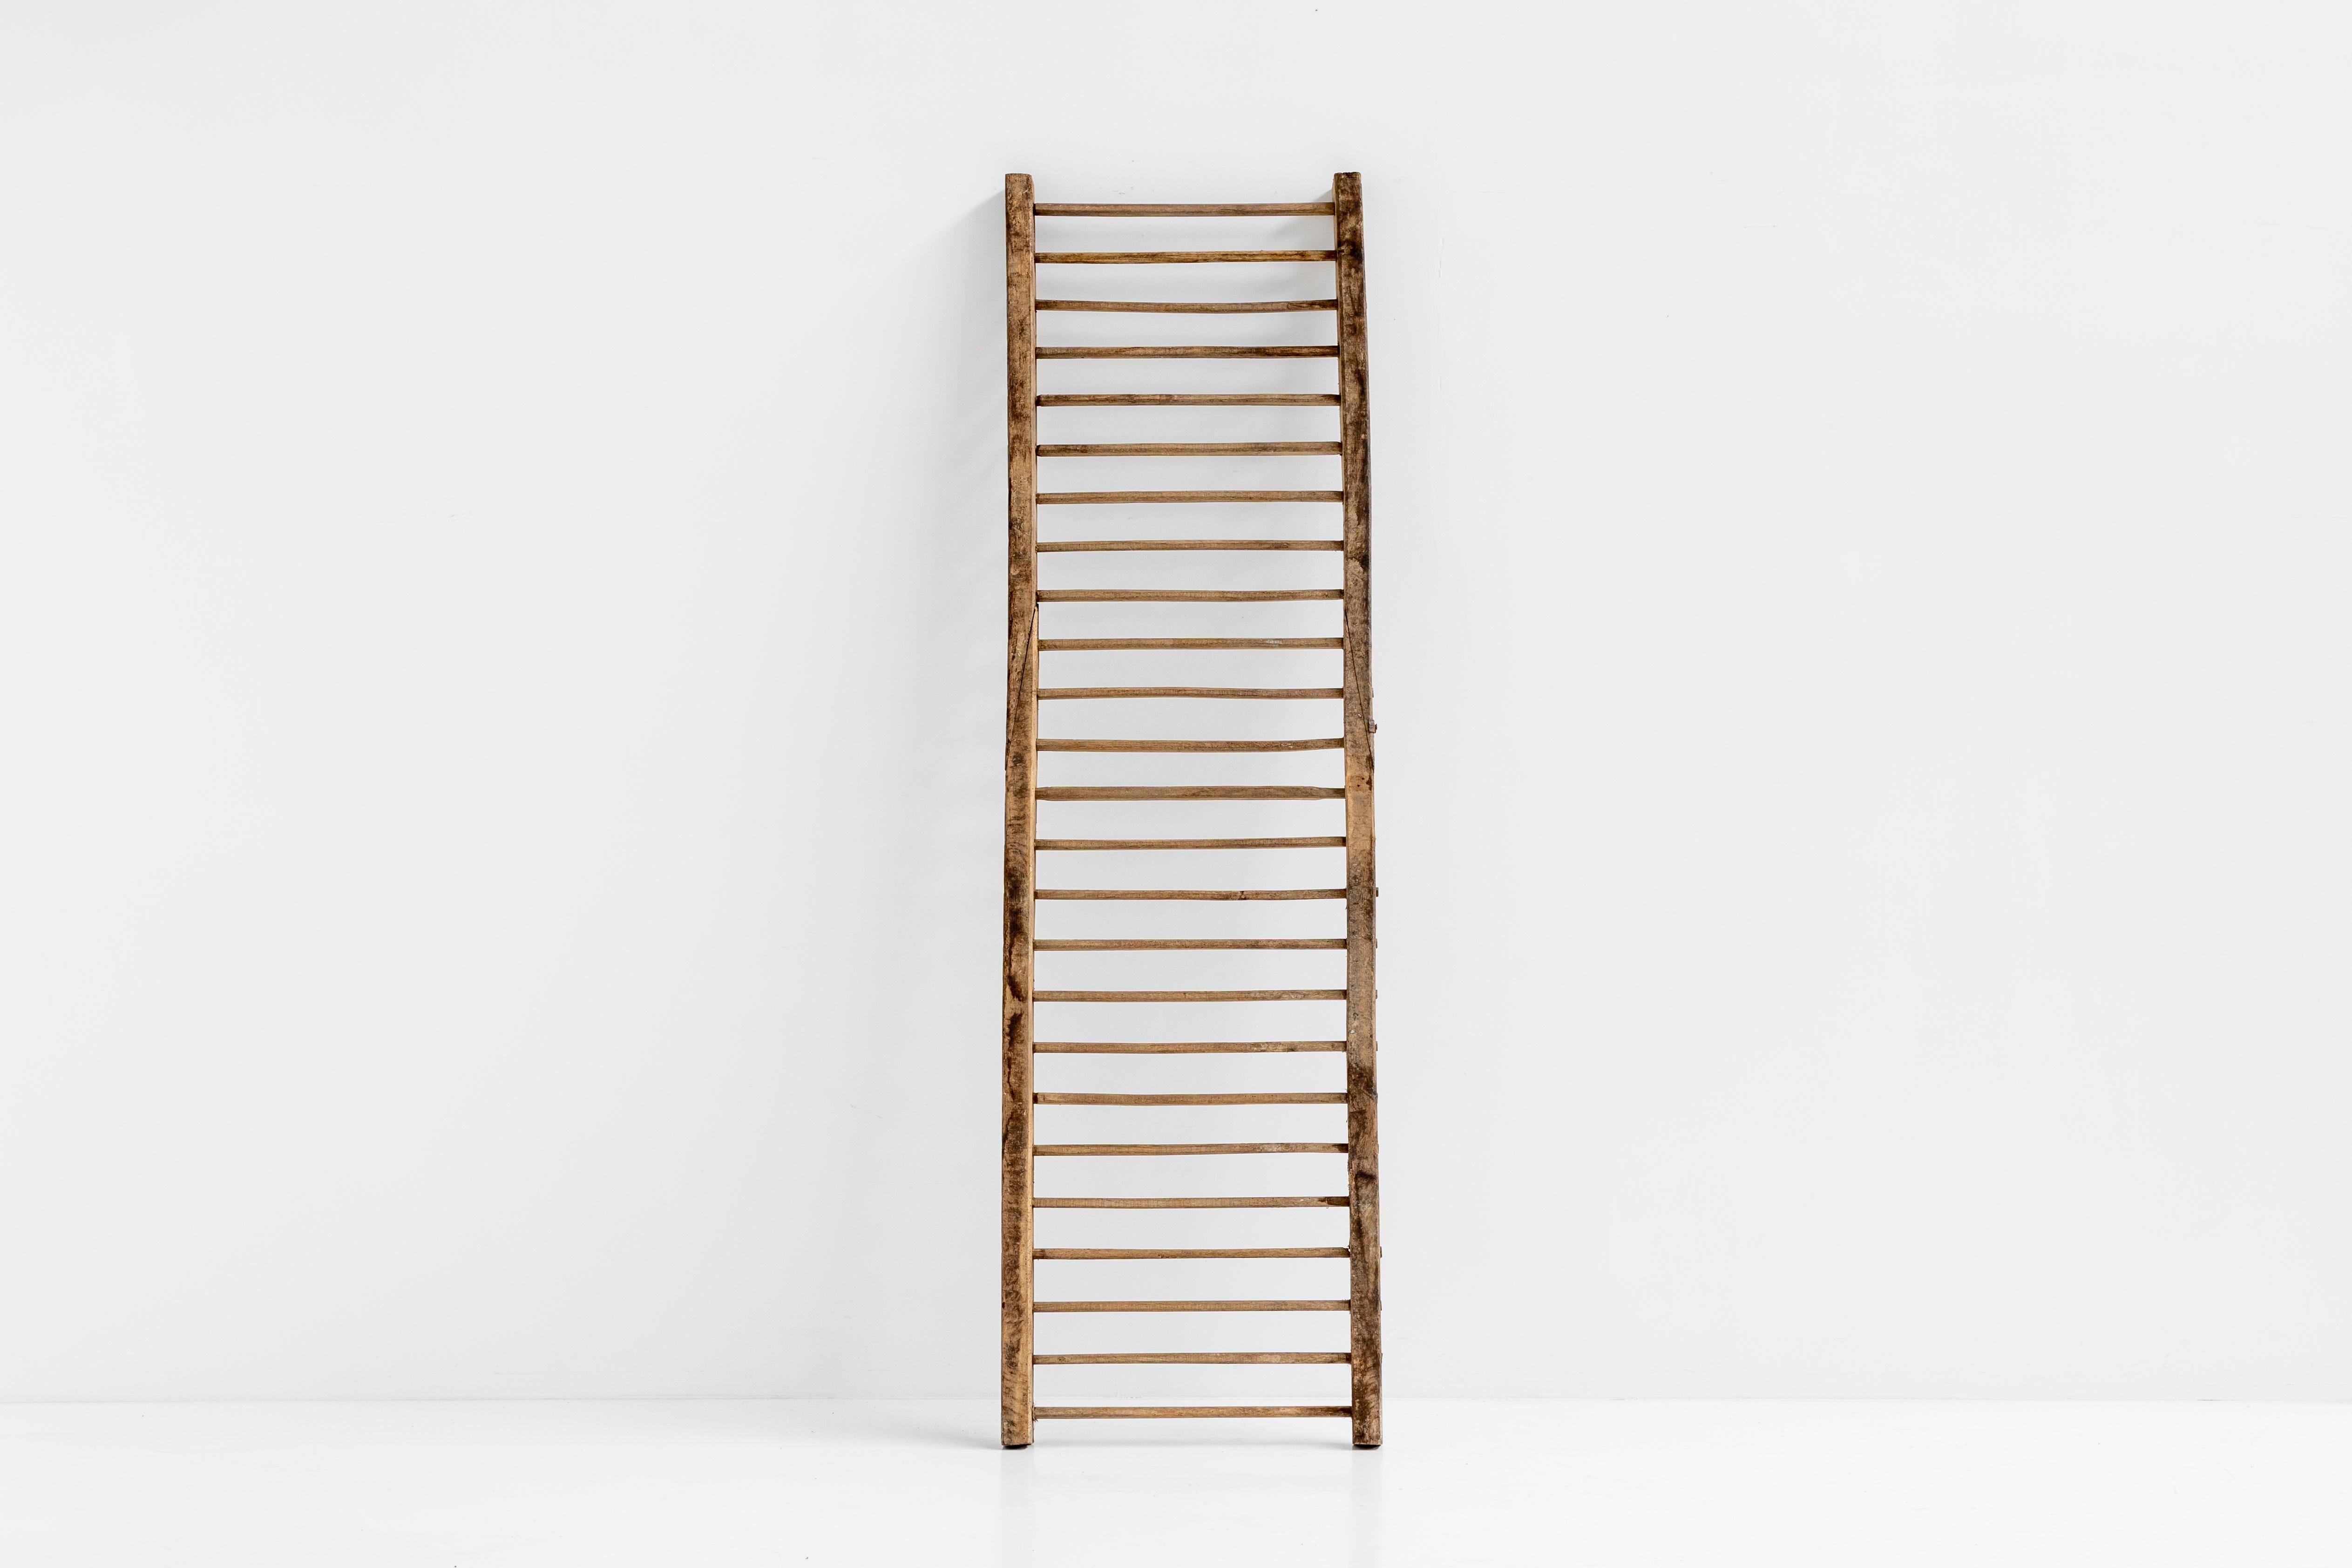 Rustic; Climbing Frame; Ladder; Monoxylite; Wabi Sabi; Antique; France; 20th Century; Art Populaire; Travail Populaire;

Rustic climbing frame from the early 20th century, a versatile work of art for your interior reminiscent of bygone eras. This